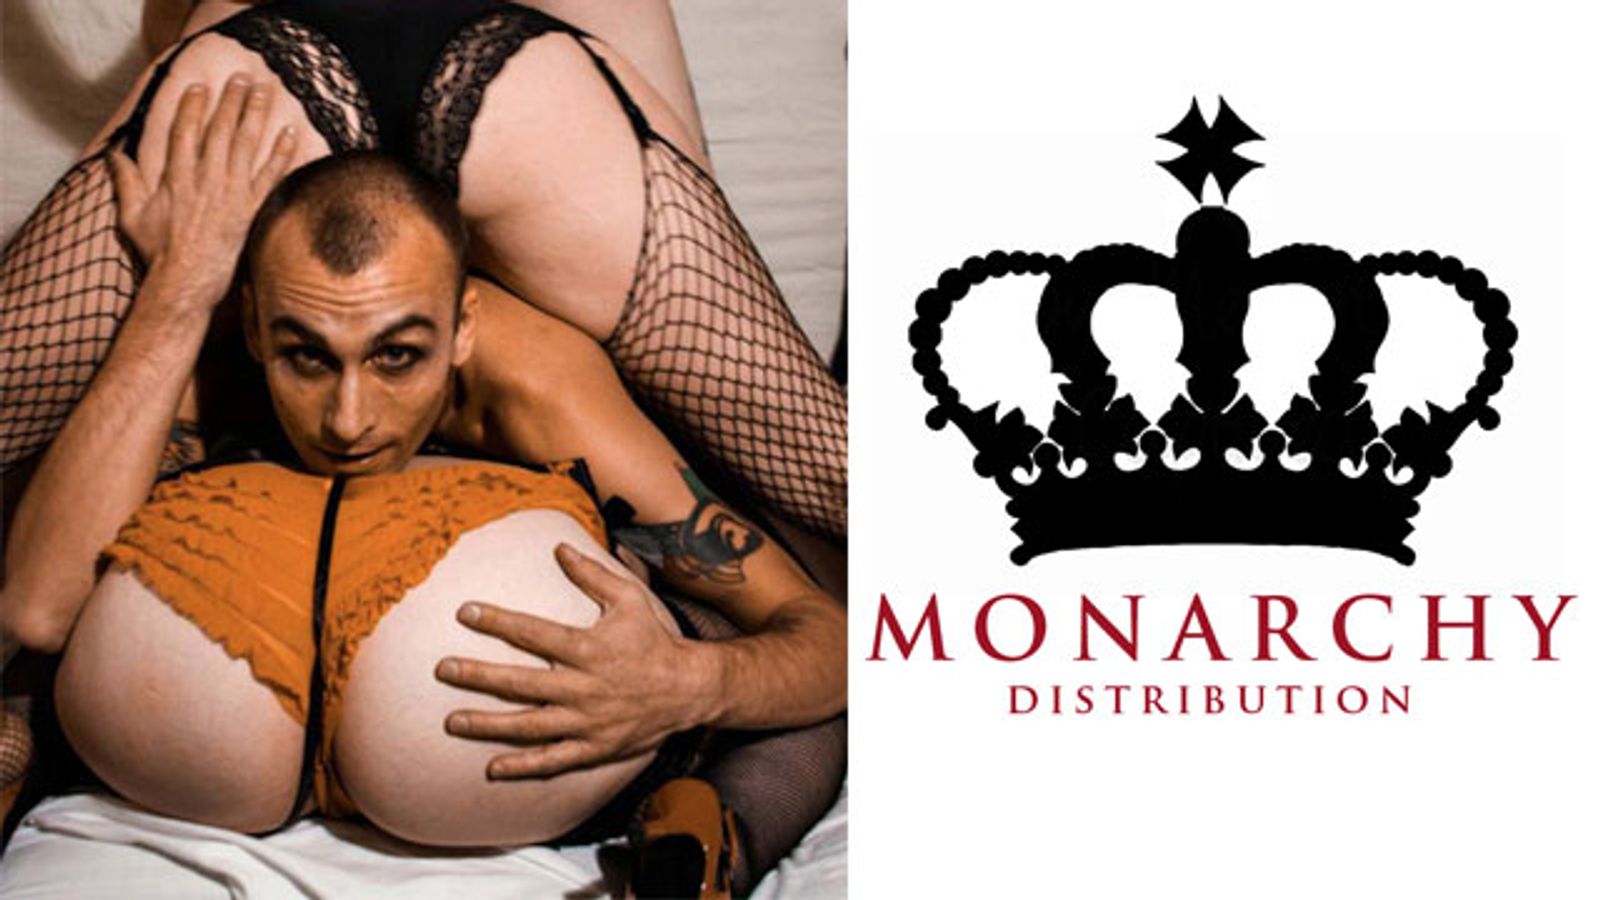 Monarchy Signs Get Shot Girls to Distro Deal